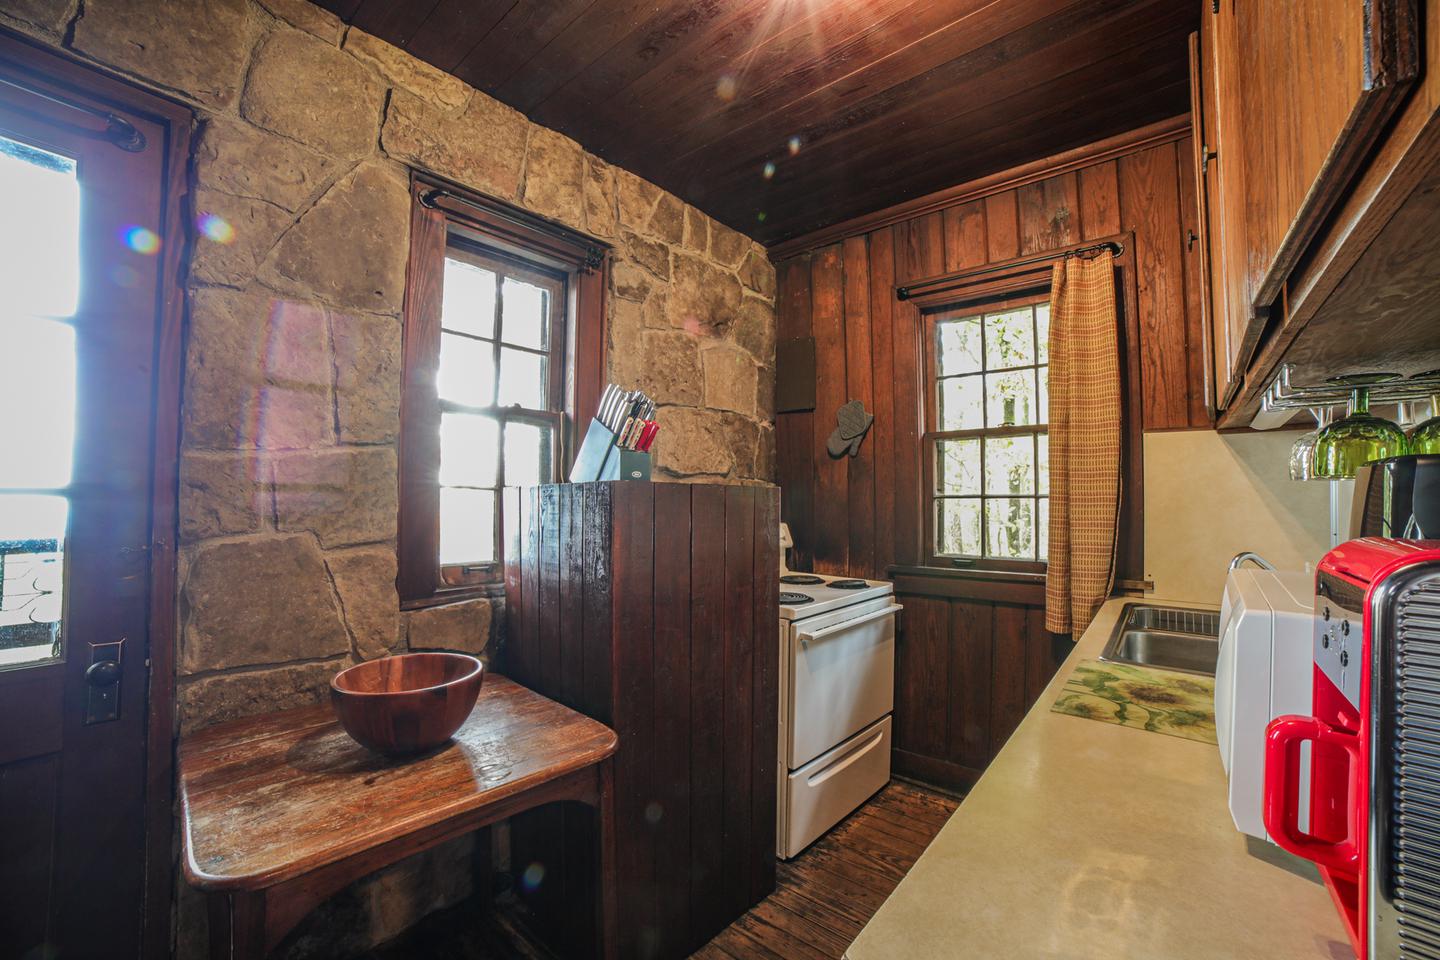 White Rock Mountain, Cabin B Kitchen.Cabin B kitchen features nice appliances, including an electric stove, refrigerator, microwave, toaster, coffee pot, crock pot, cooking utensils, pots & pans, vintage dishes, and much more!